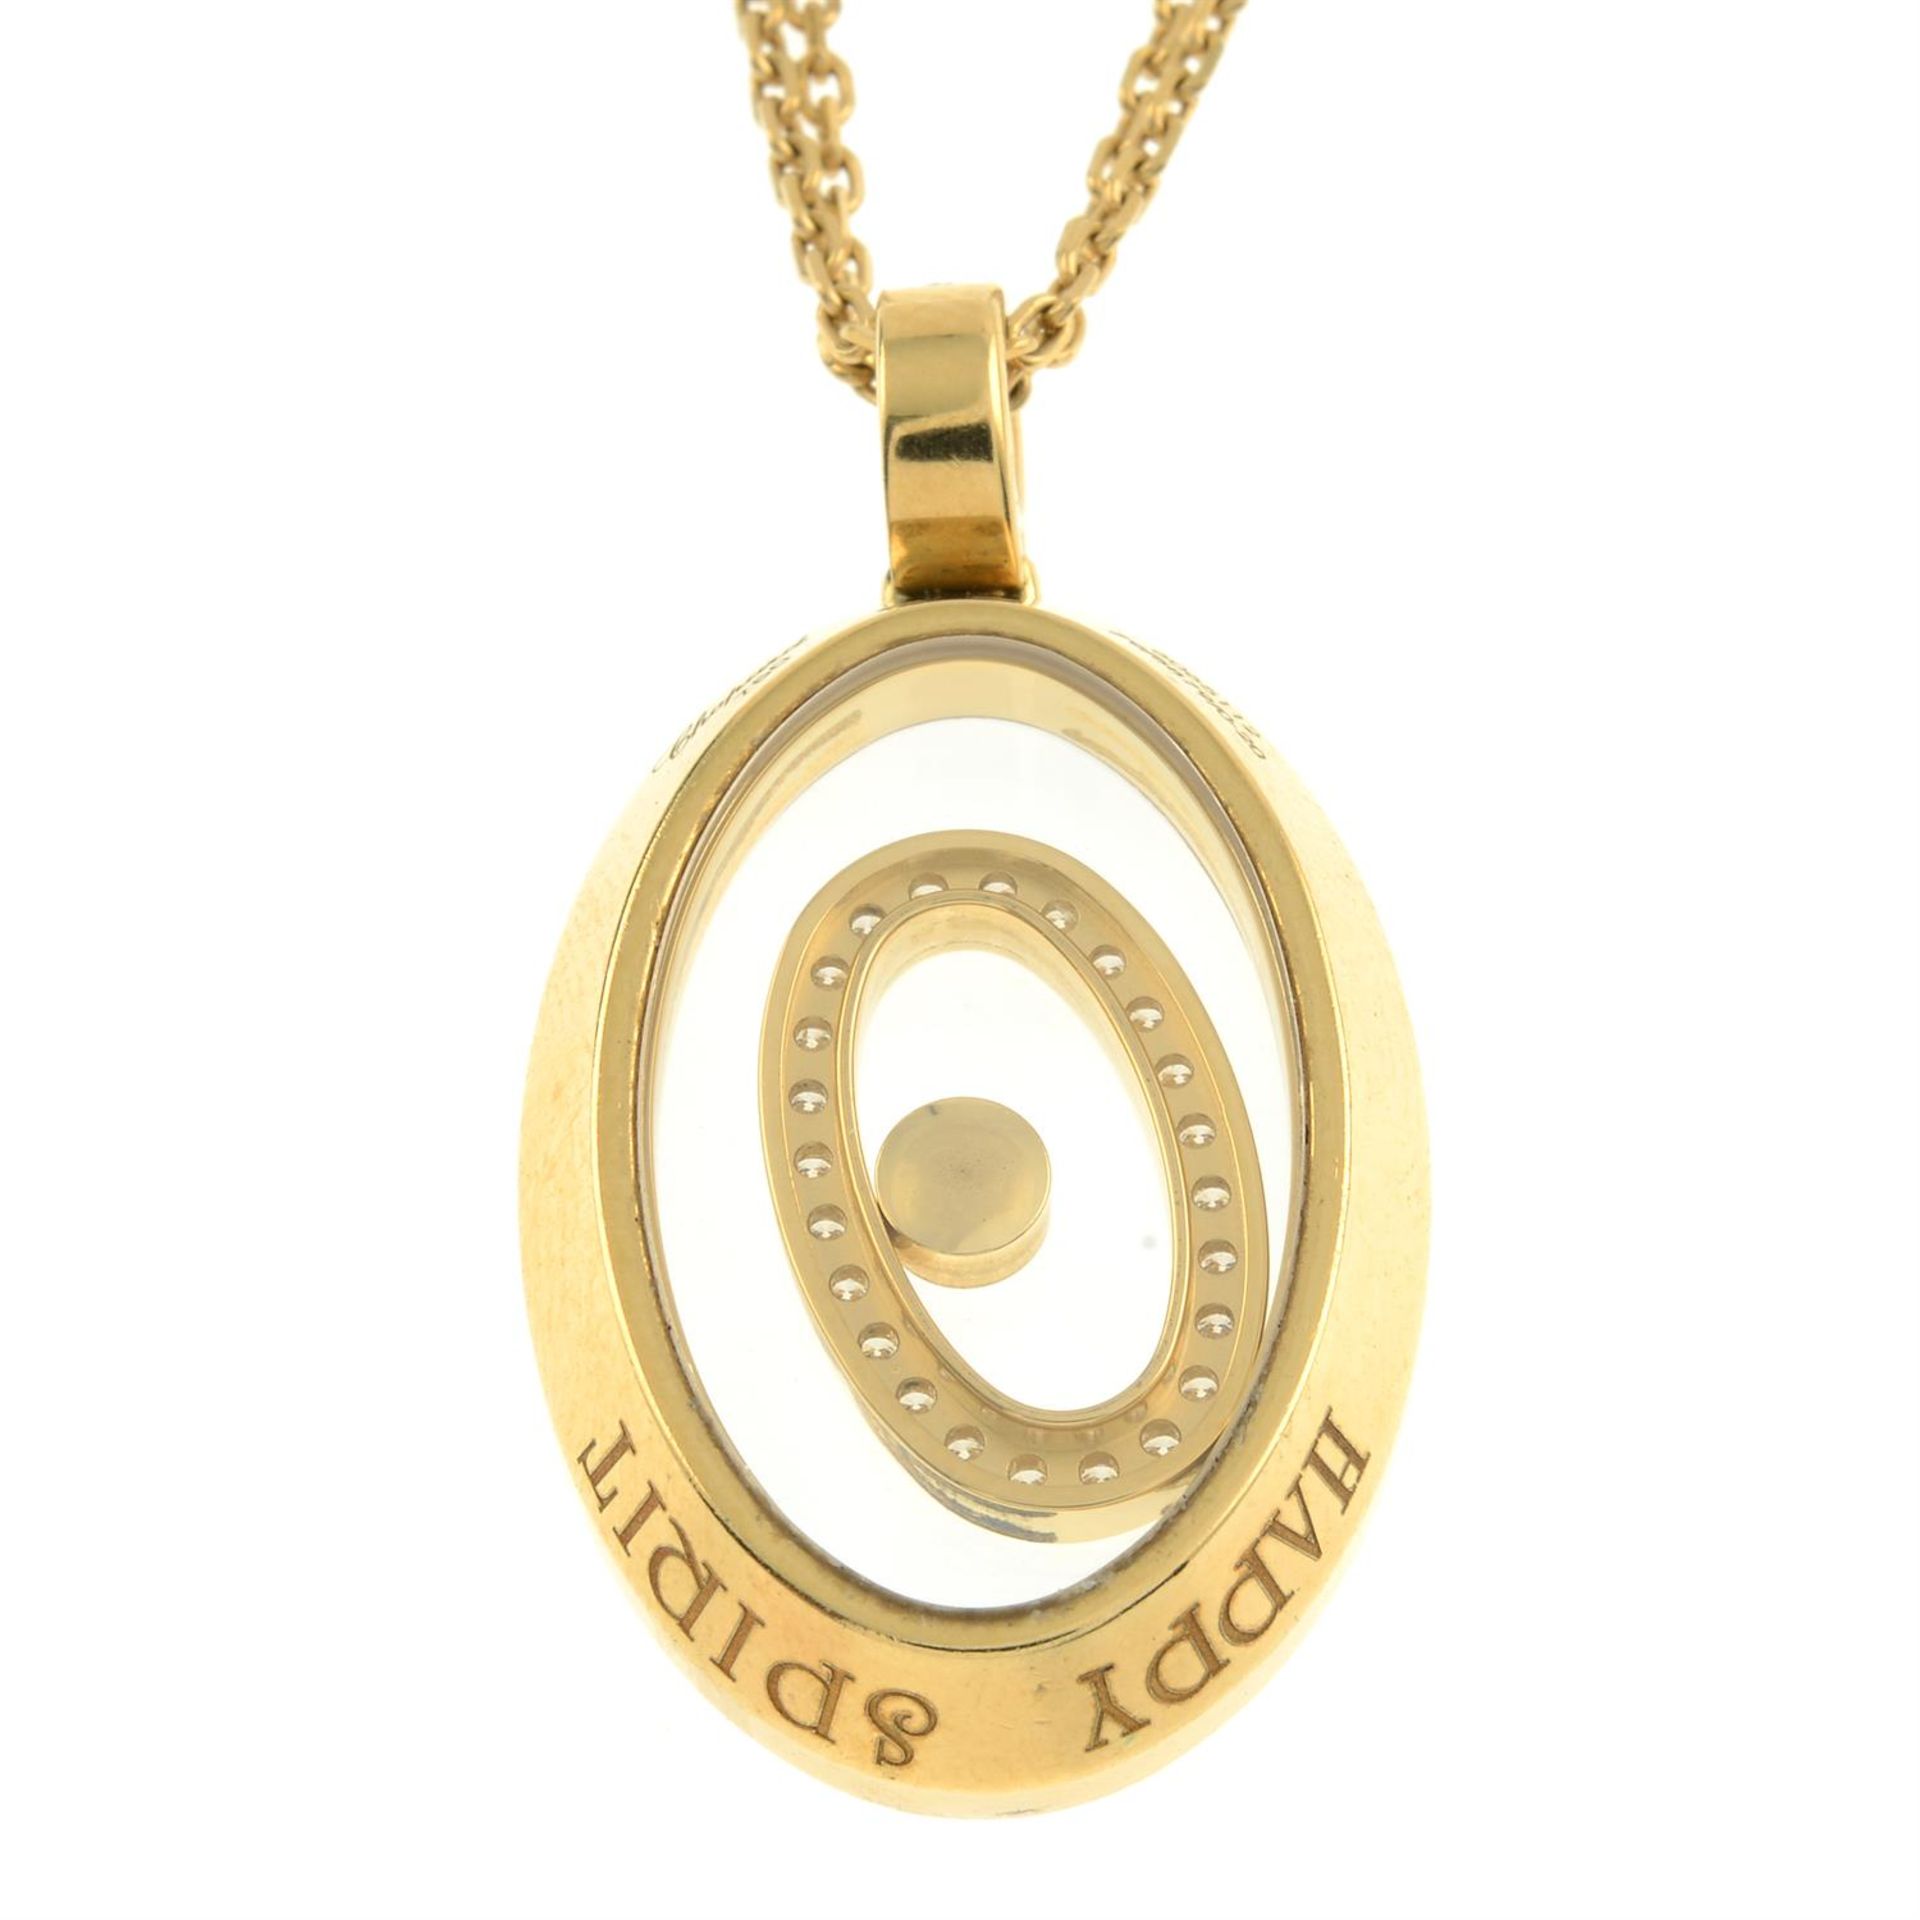 An 18ct gold brilliant-cut diamond 'Happy Spirit' pendant, with two-row chain, by Chopard. - Image 3 of 5